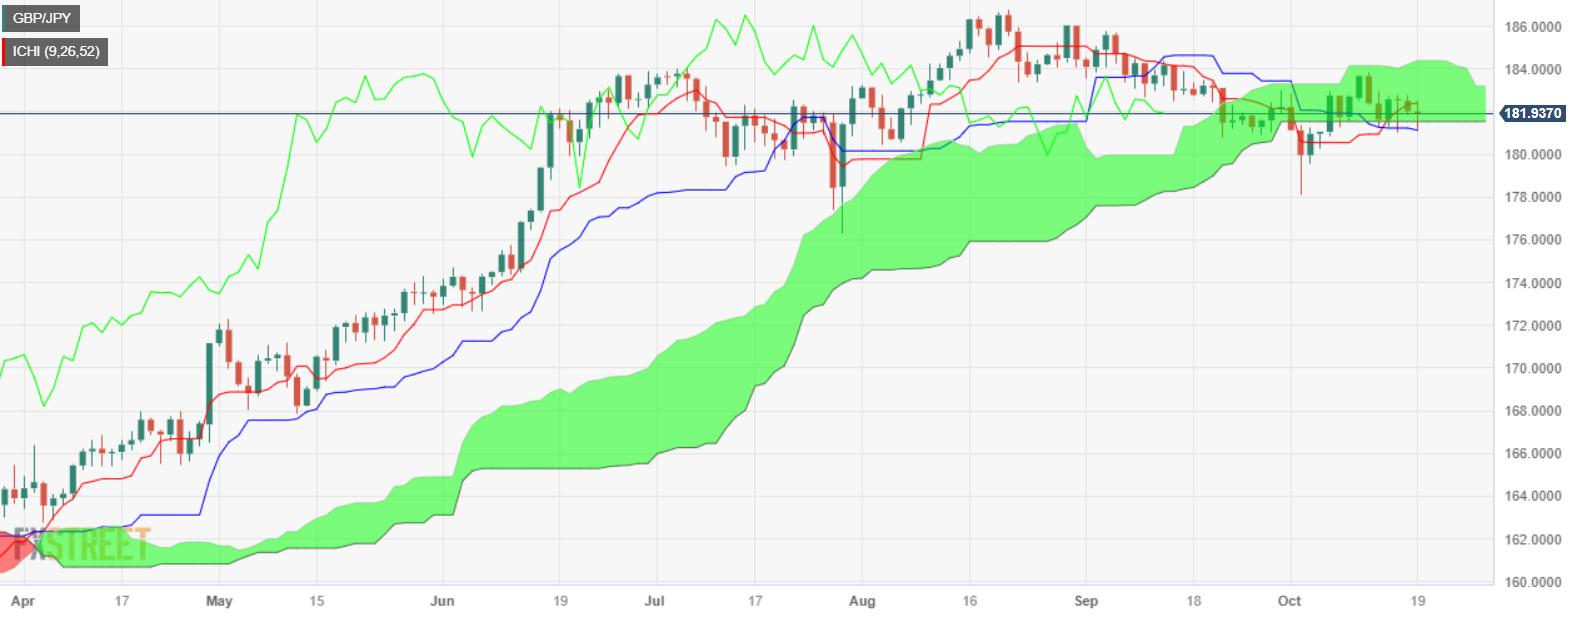 GBP/JPY Price Analysis: Dips for third straight day, with bears firmly in charge